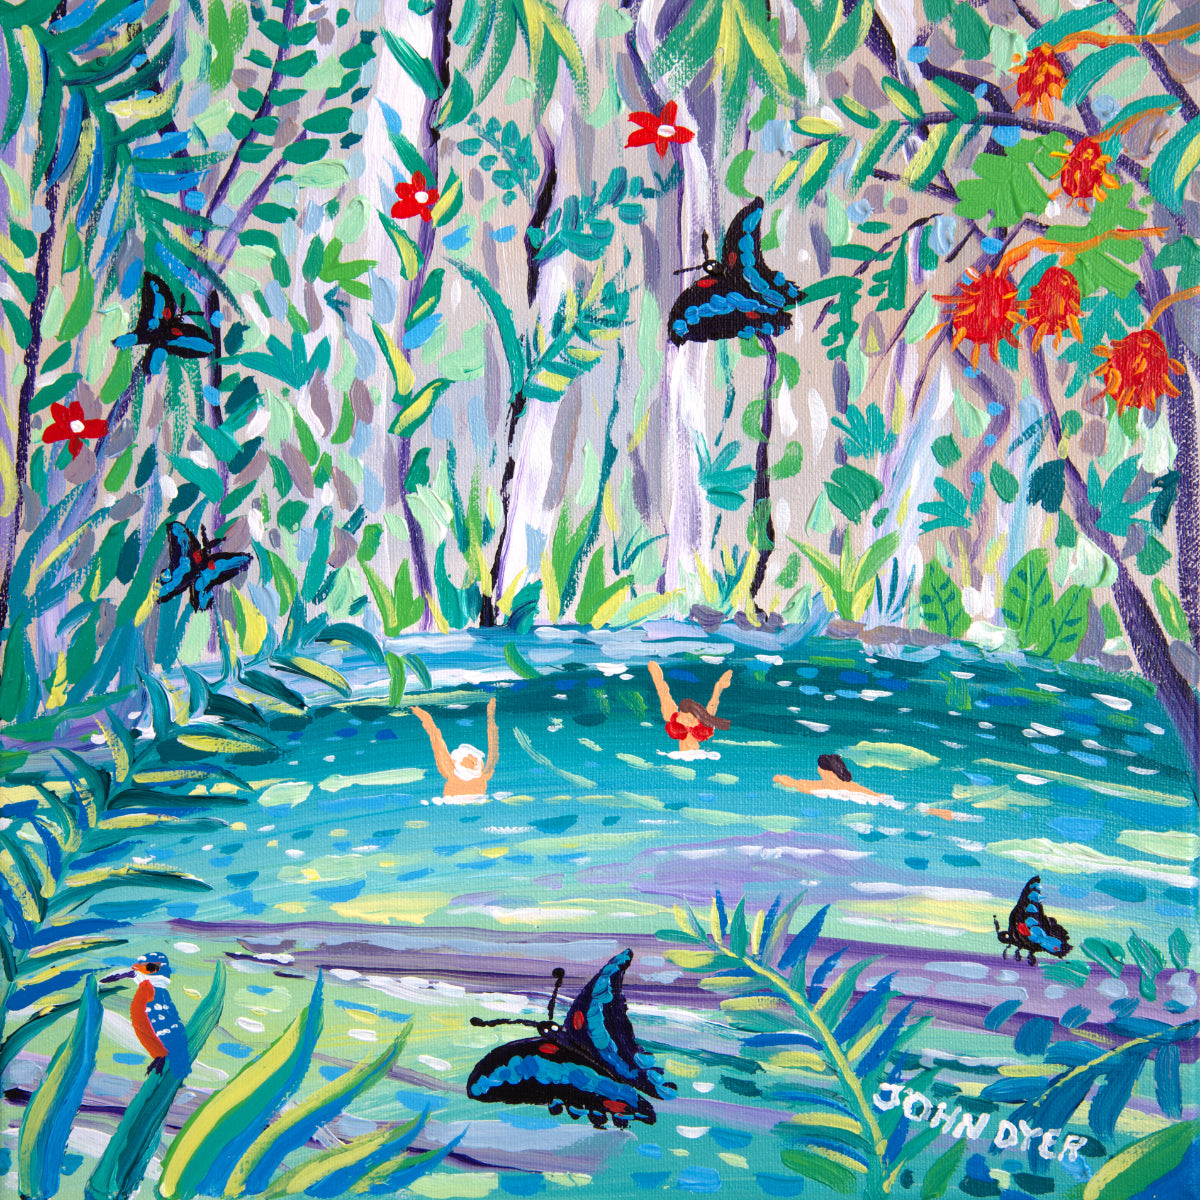 Limited Edition Jungle Print by Environmental Artist John Dyer. 'Clearwater Cave Swimmers, Mulu, Borneo'.